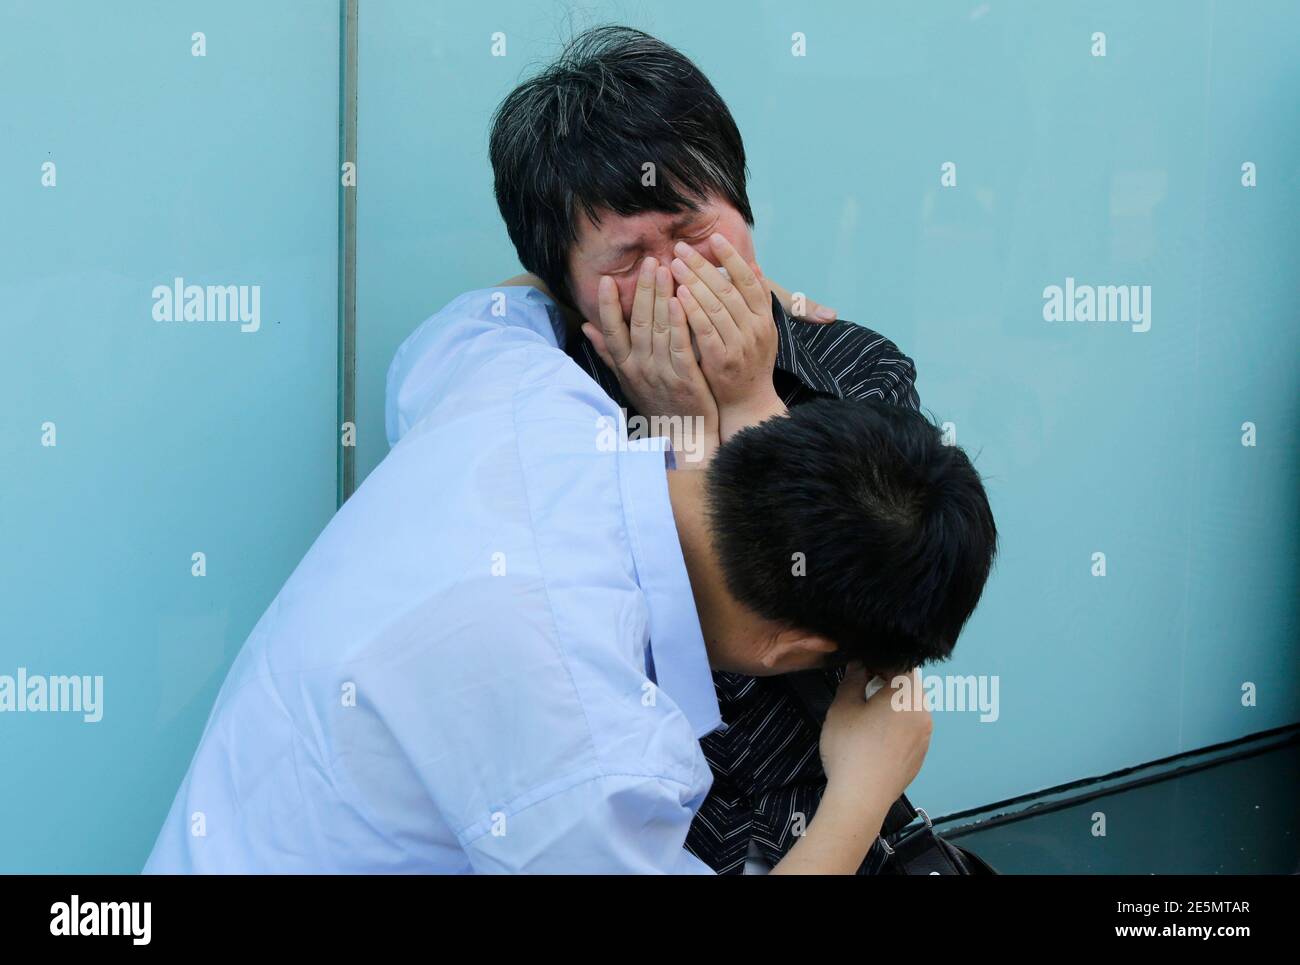 A woman, whose son was aboard the missing Malaysia Airlines flight MH370, cries with her husband after they failed to express their appeals to the airline outside its office in Beijing June 11, 2014. Months of searches have failed to turn up any trace of the missing Boeing 777, which disappeared on March 8 carrying 239 passengers and crew shortly after taking off from Kuala Lumpur bound for Beijing. REUTERS/Jason Lee (CHINA - Tags: TRANSPORT DISASTER) Stock Photo